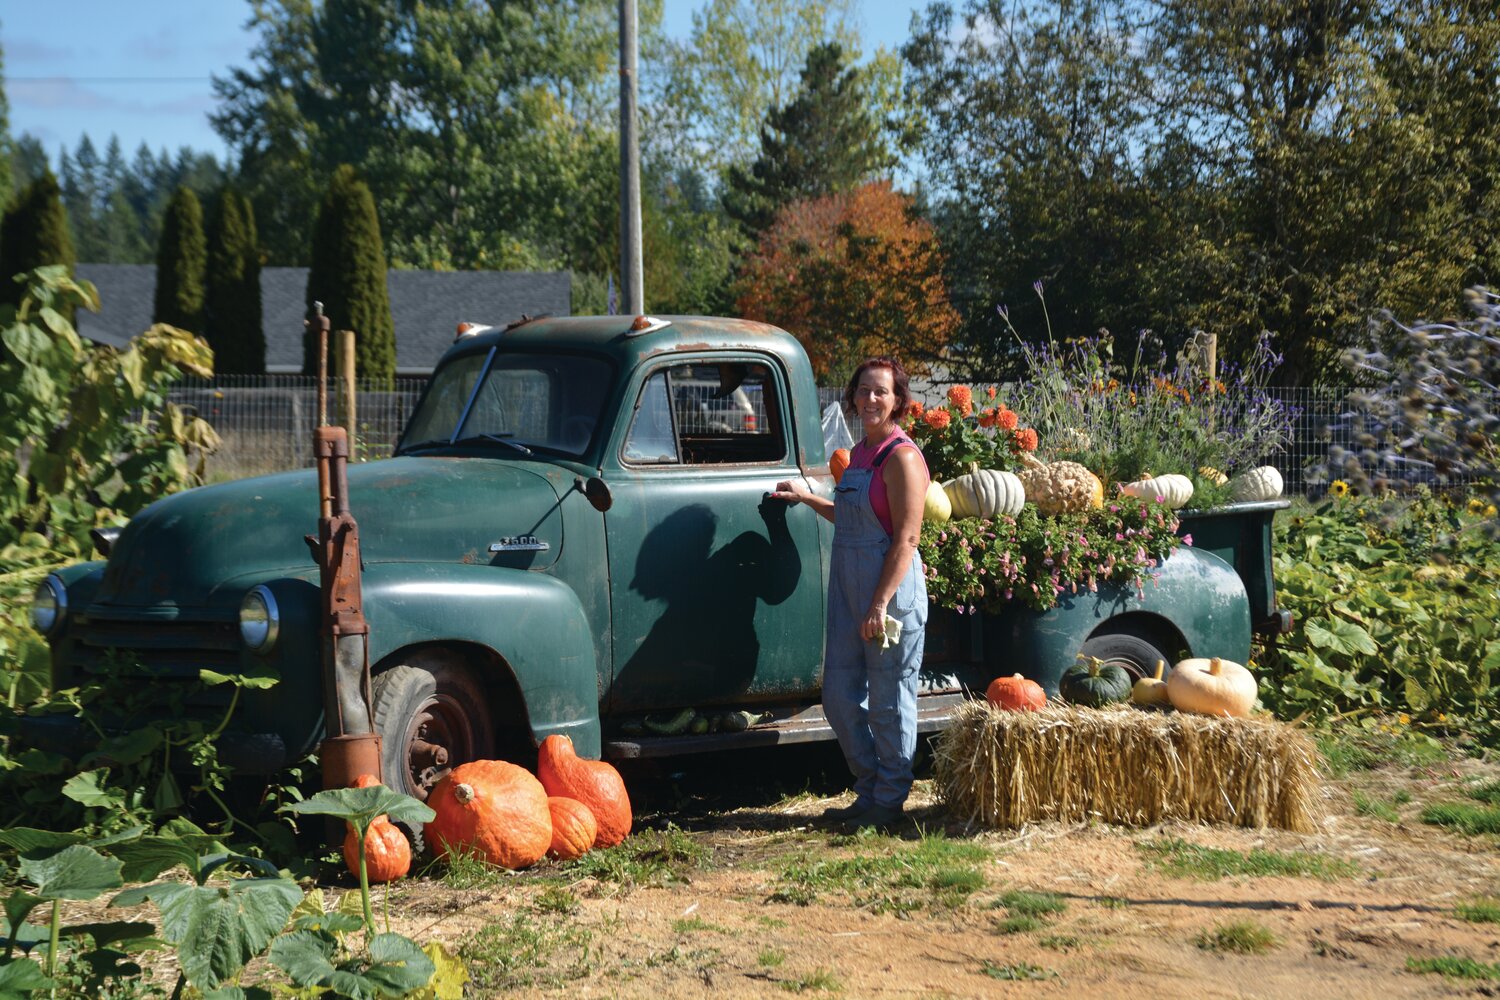 Dawnette Lough, owner of Tranquility Flower Farm, poses in front of a decorative pickup truck at the farm.